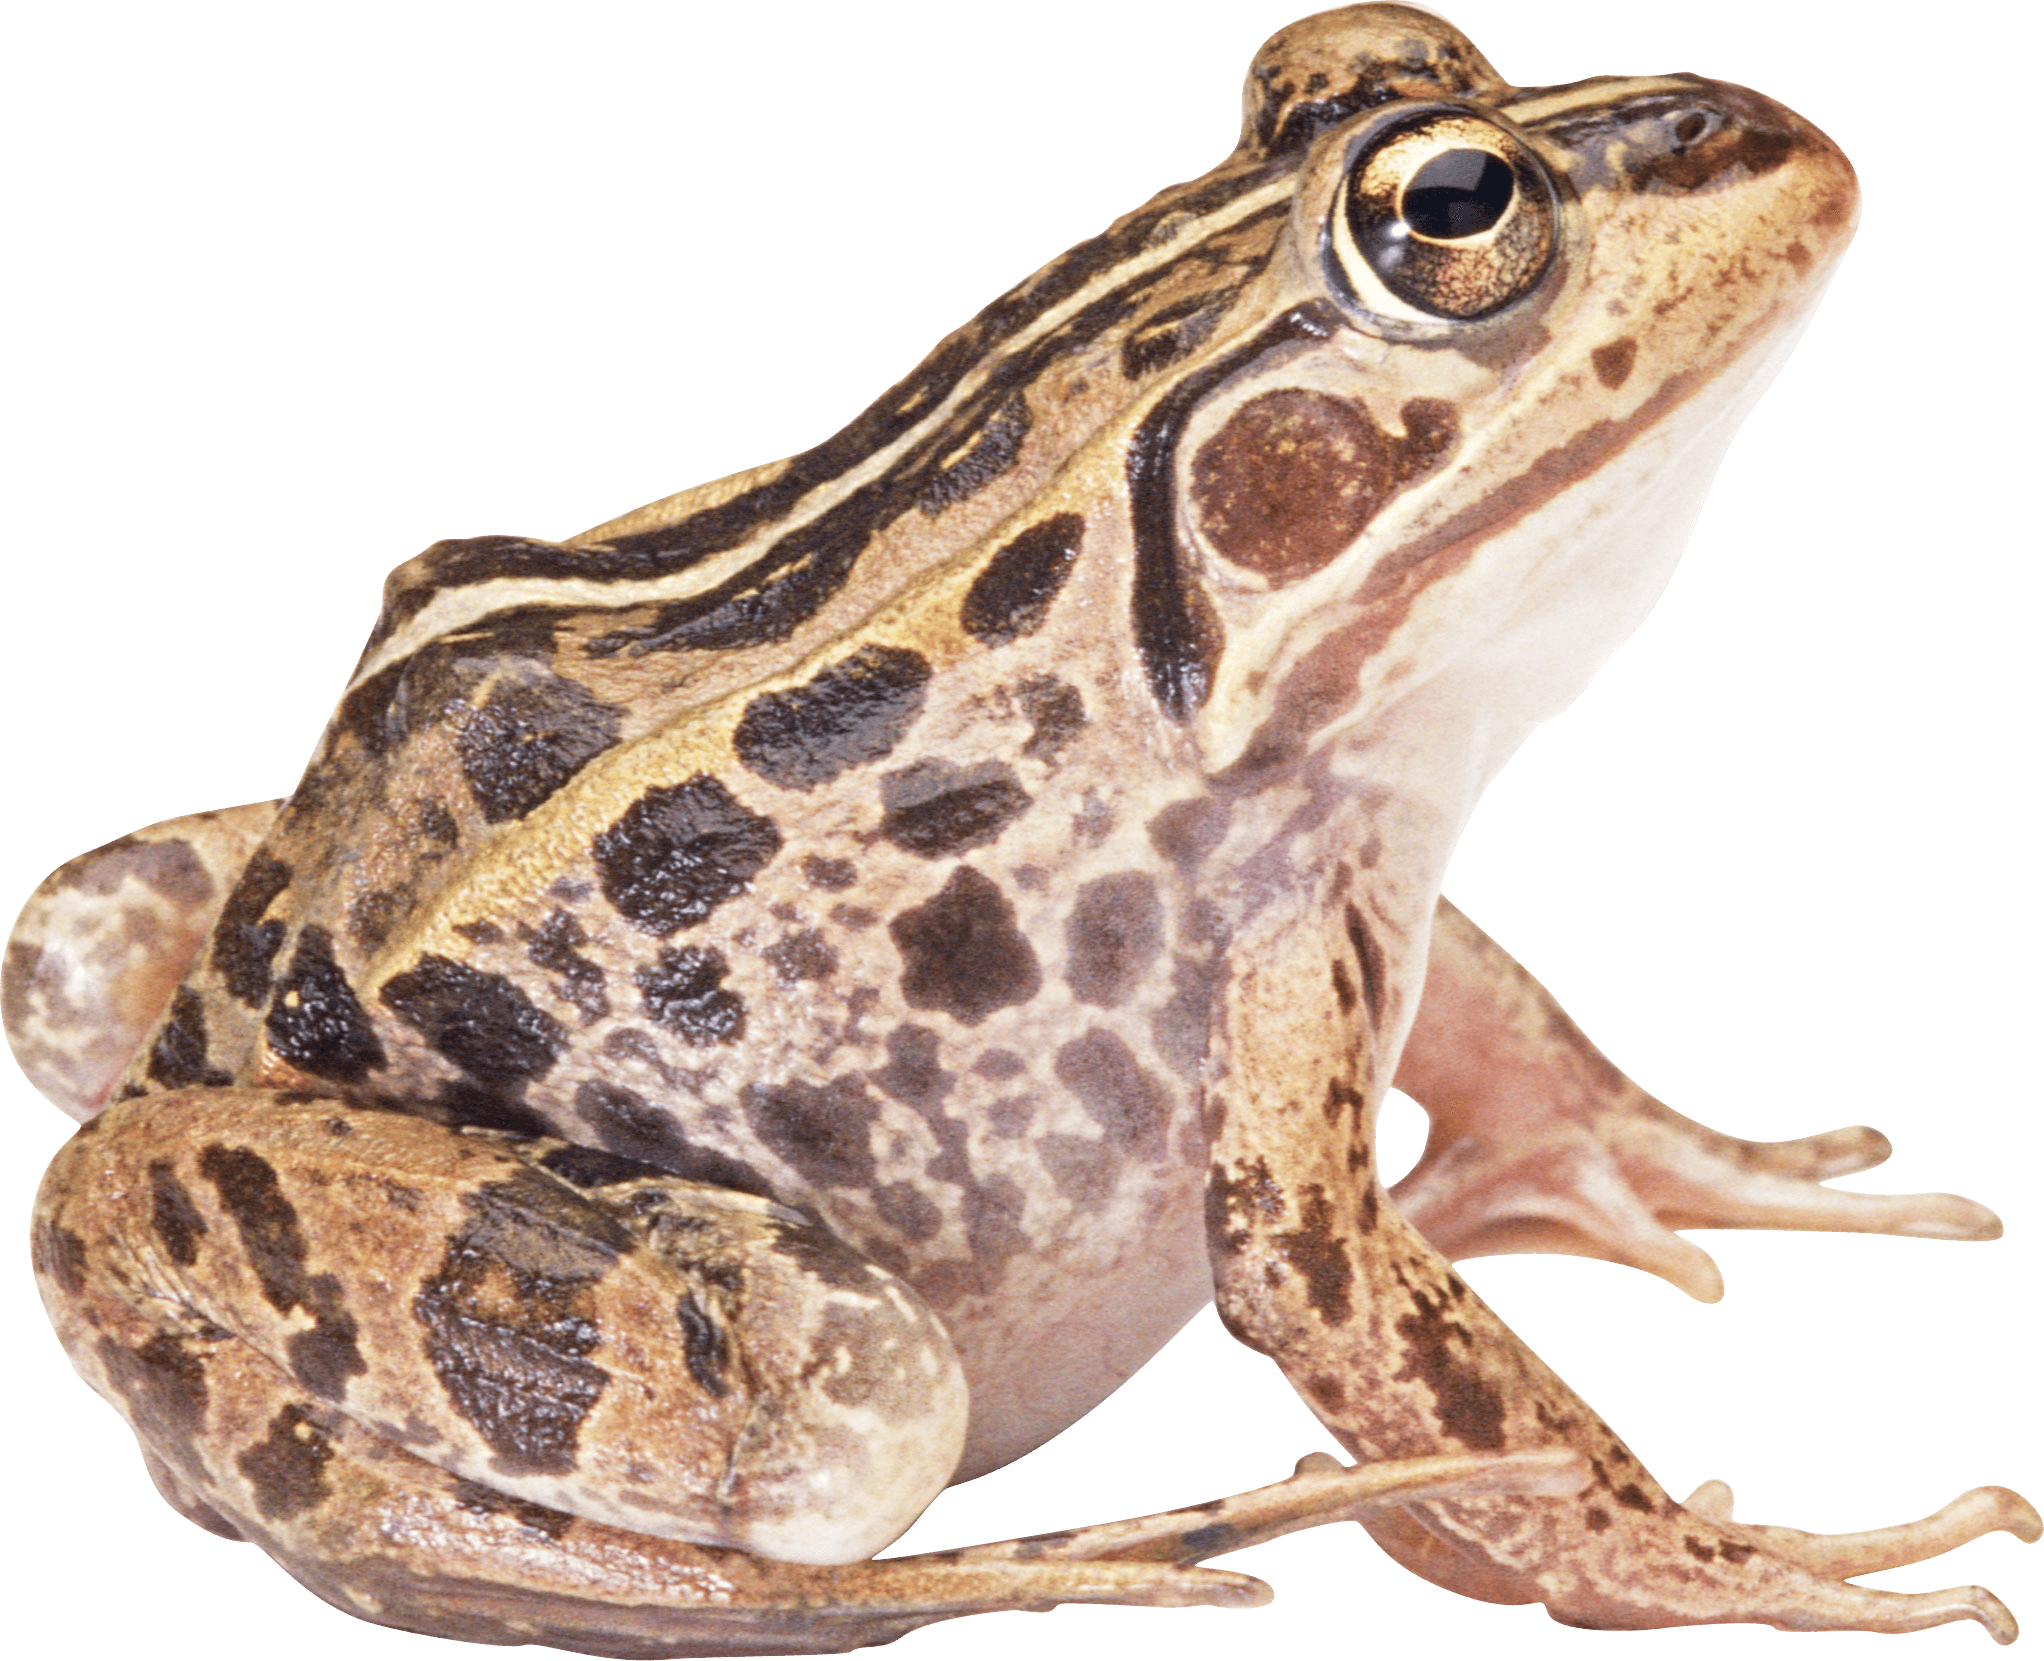 Frog PNG - 20634